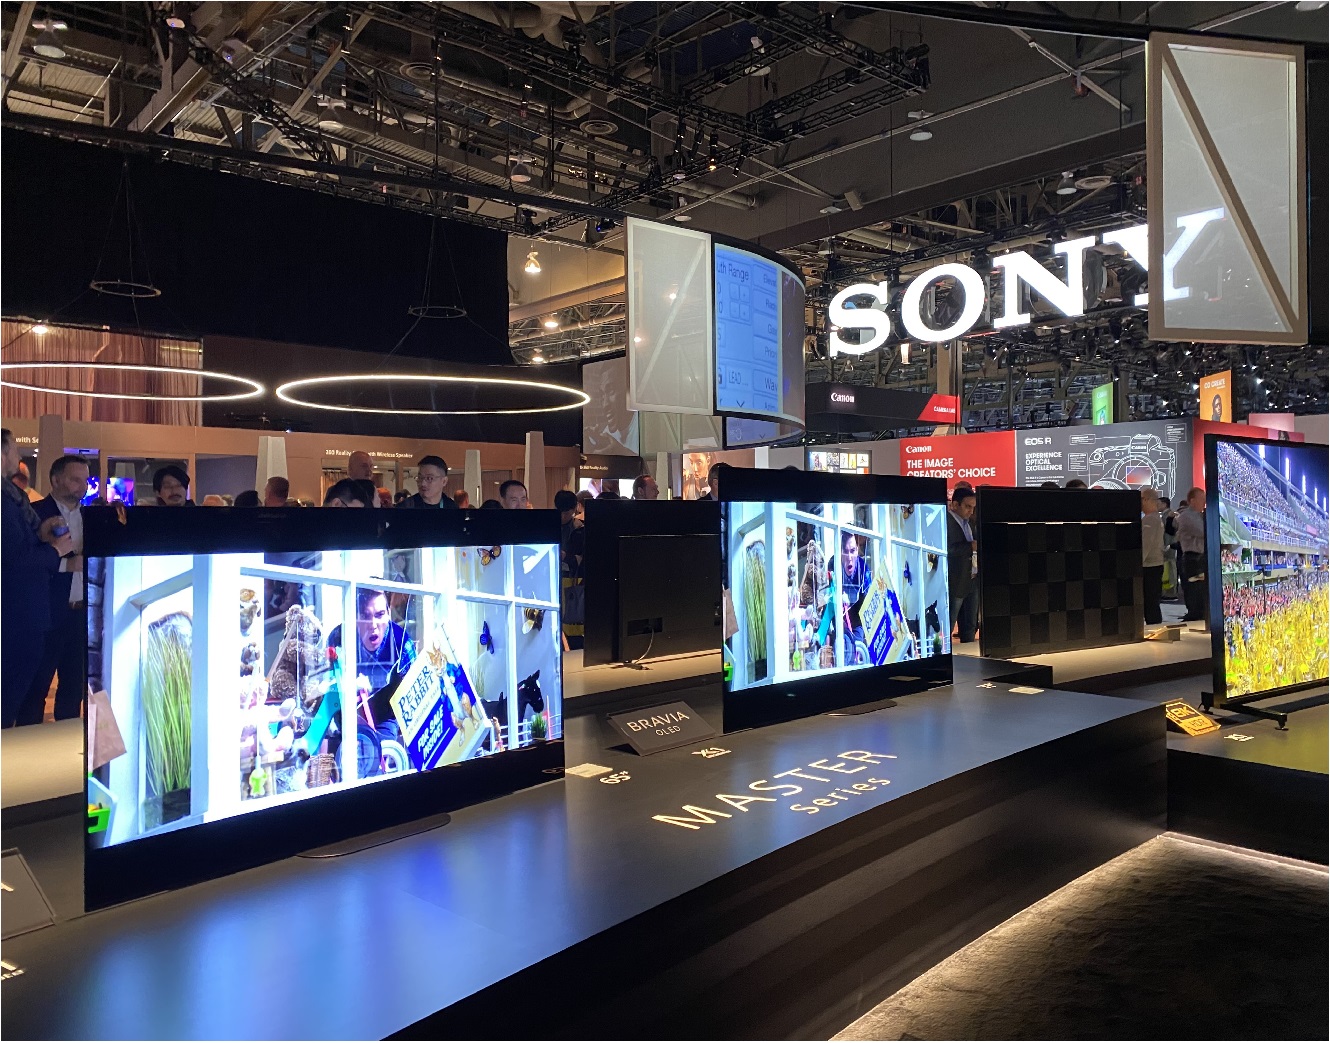 image of 2 new Sony TV models next to each other at CES 2020